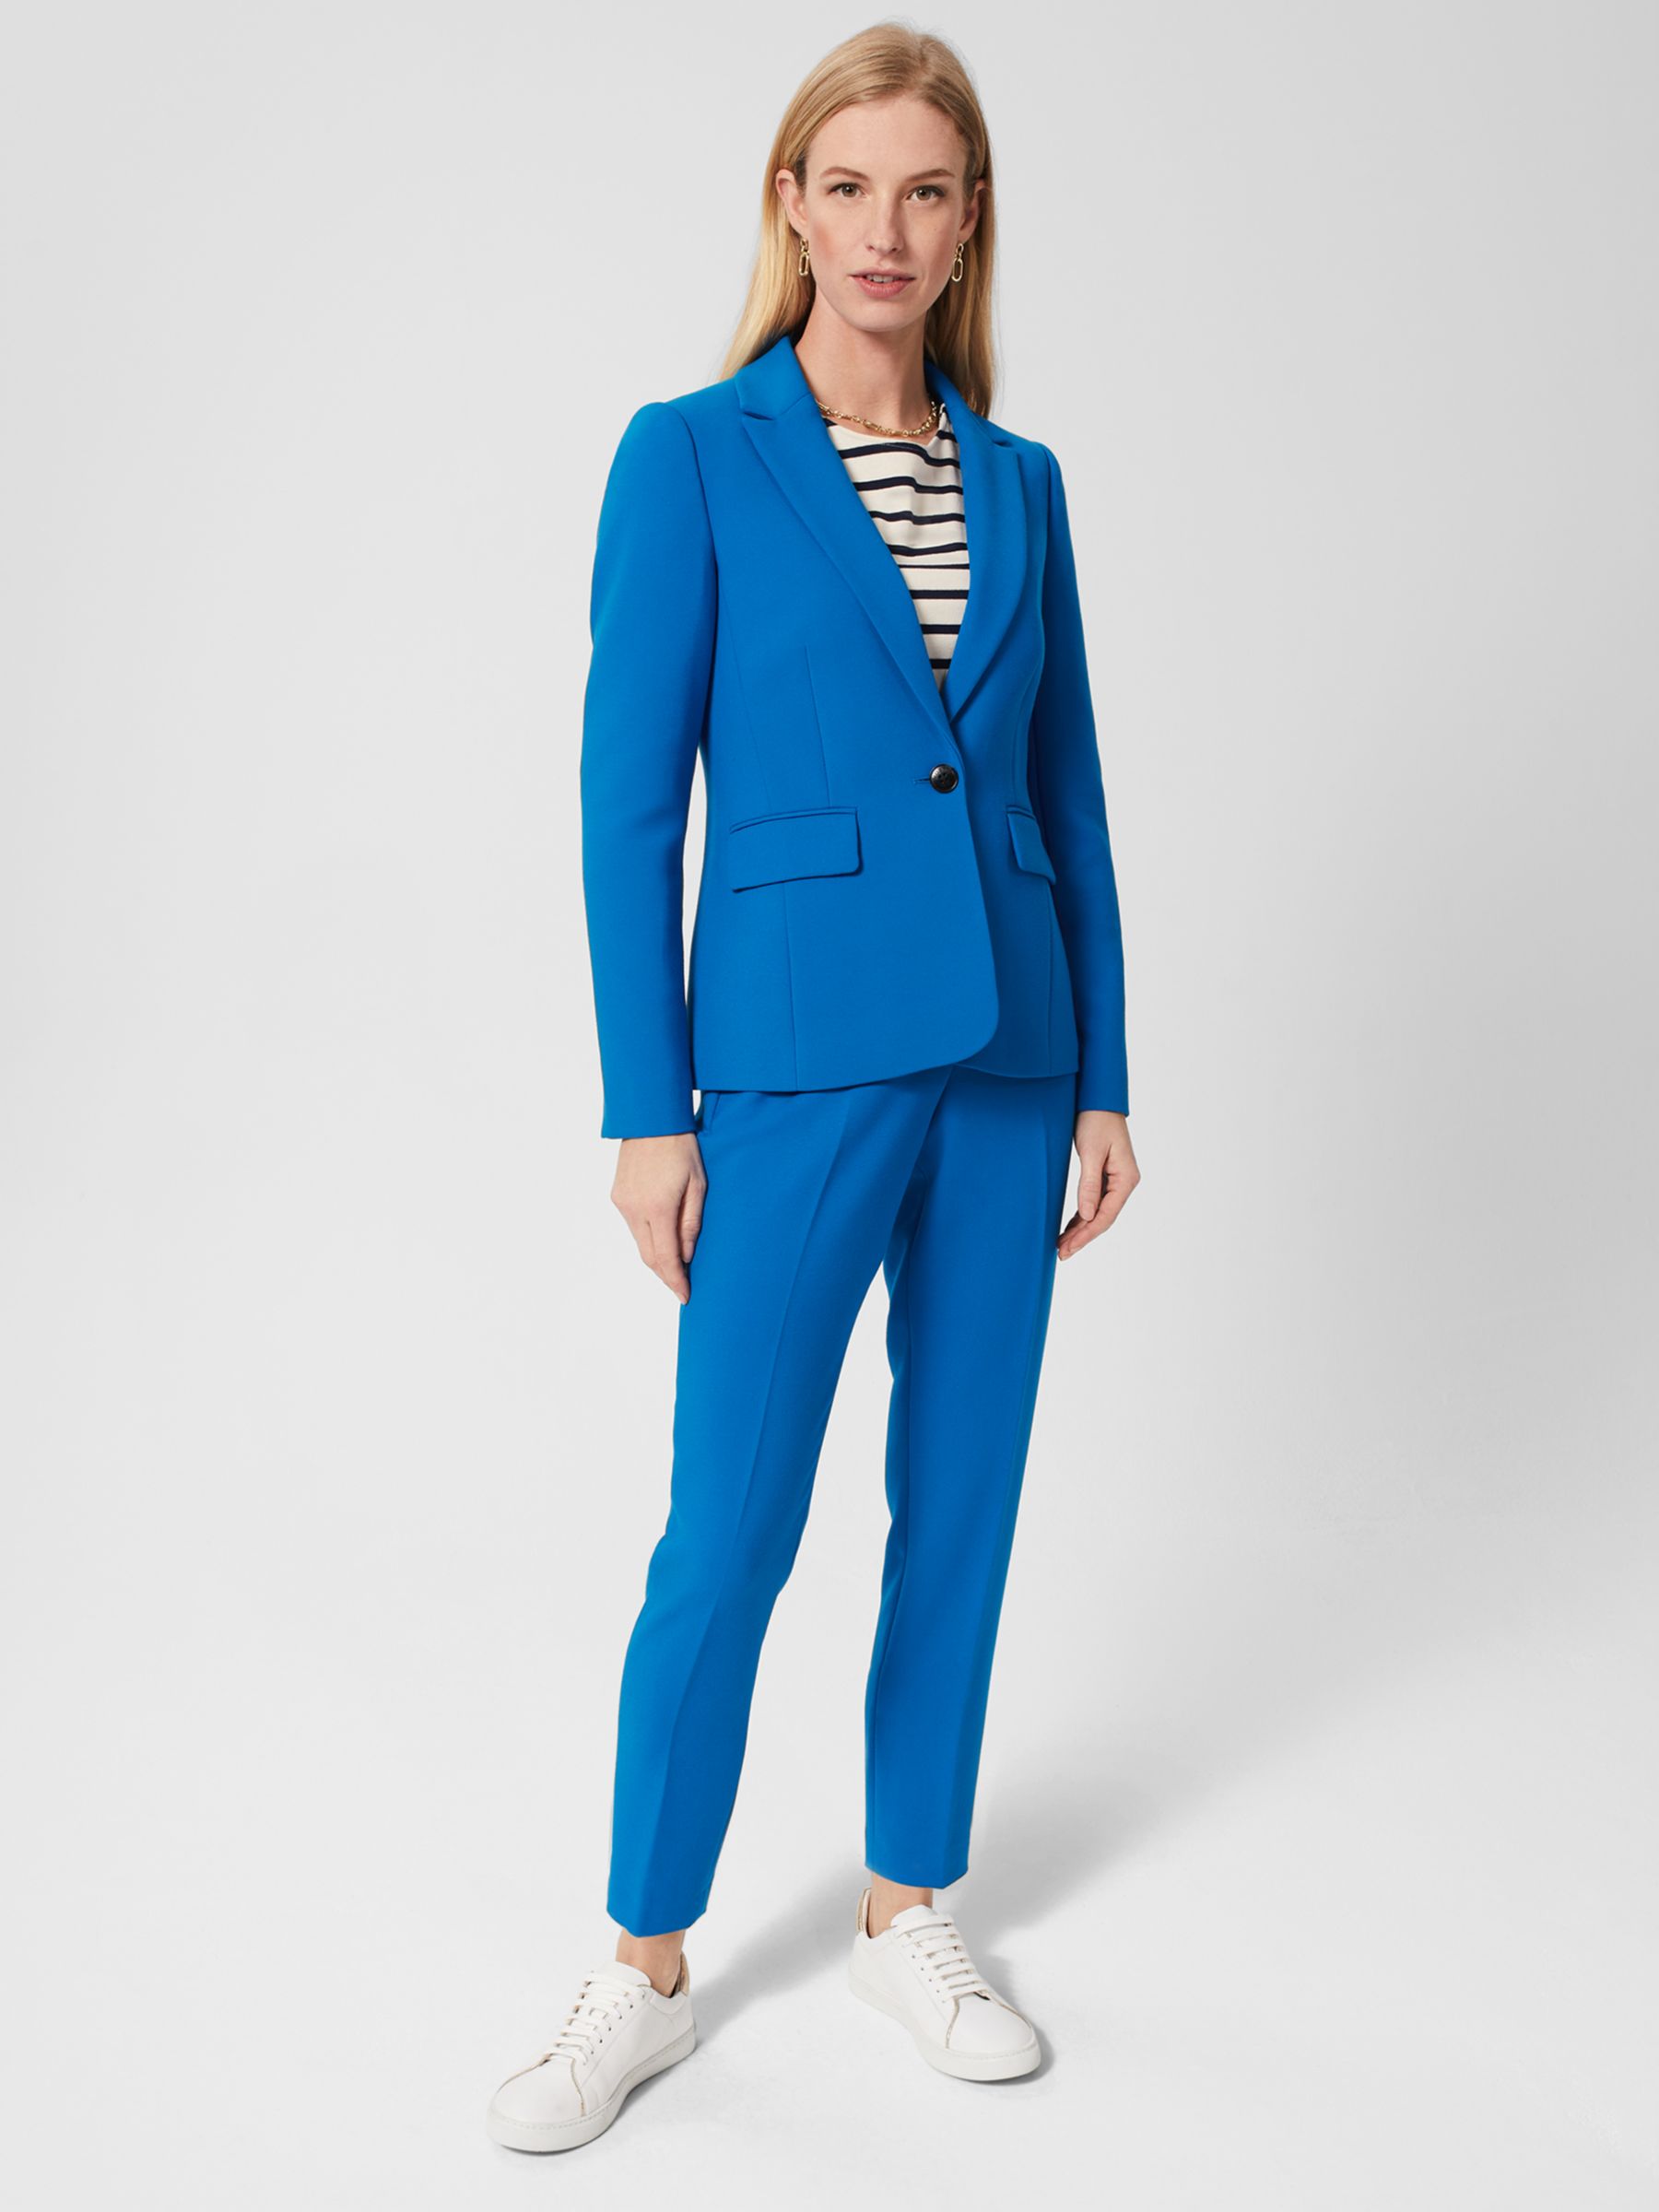 Beatrice Skirt Suit Outfit